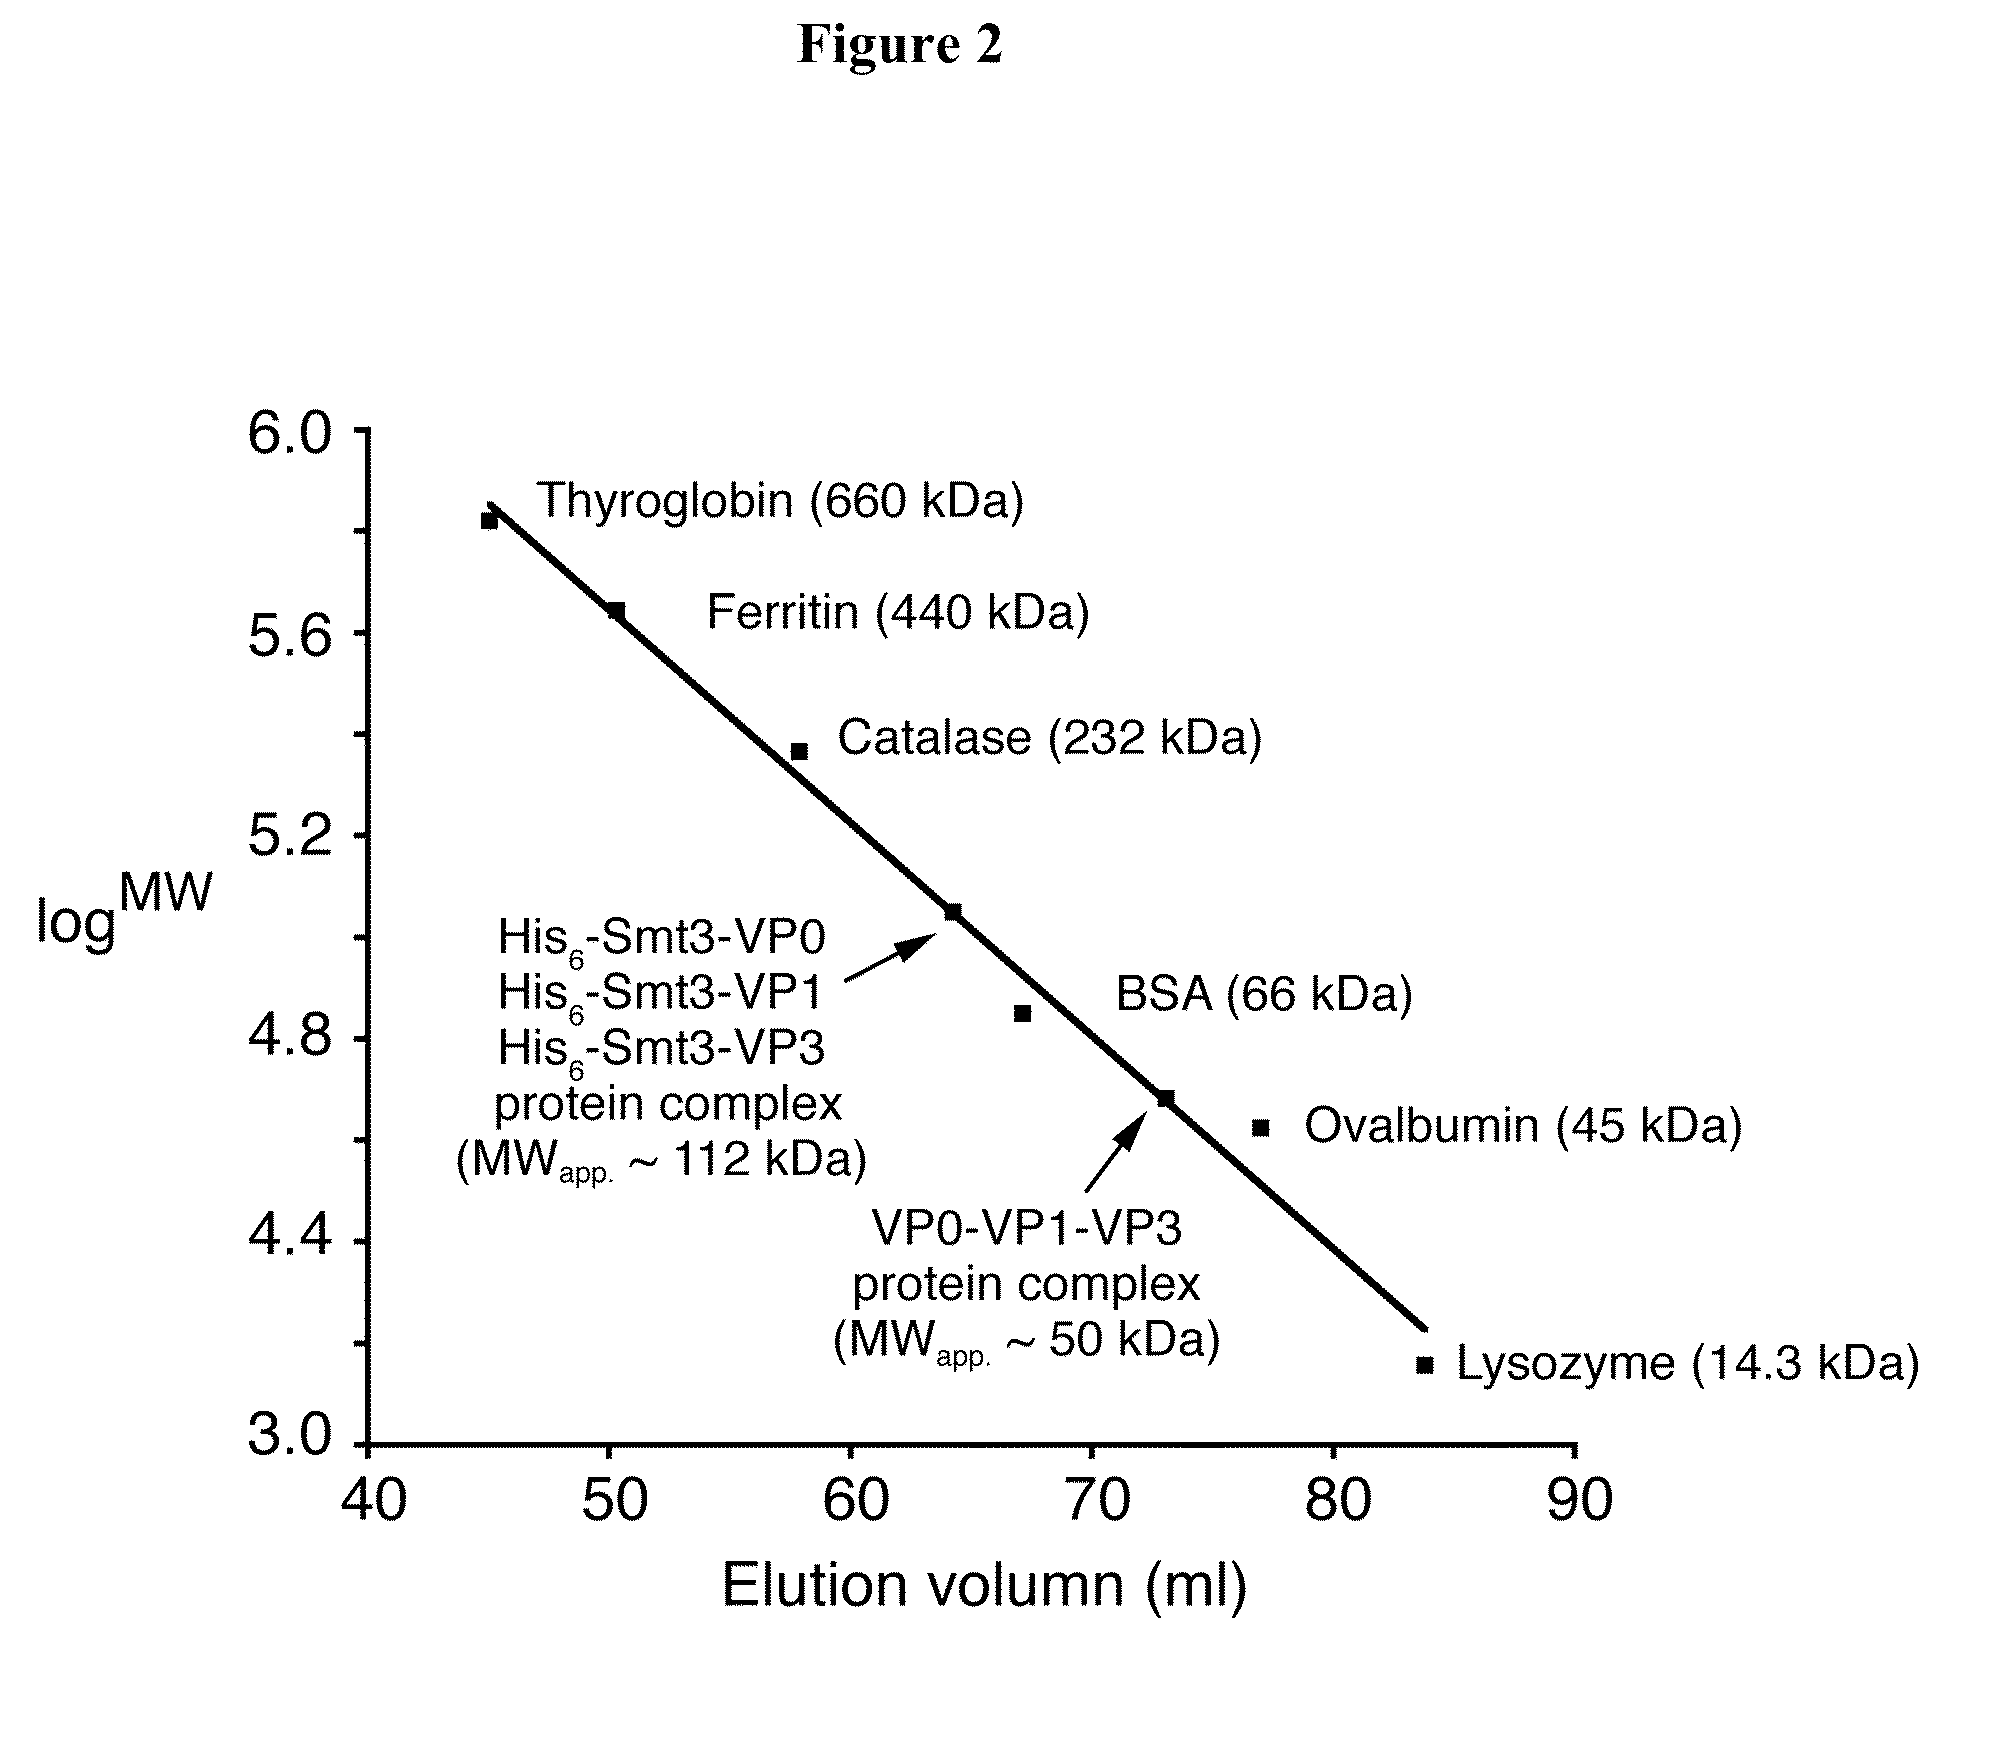 Method of producing virus-like particles of picornavirus using a small-ubiquitin-related fusion protein expression system